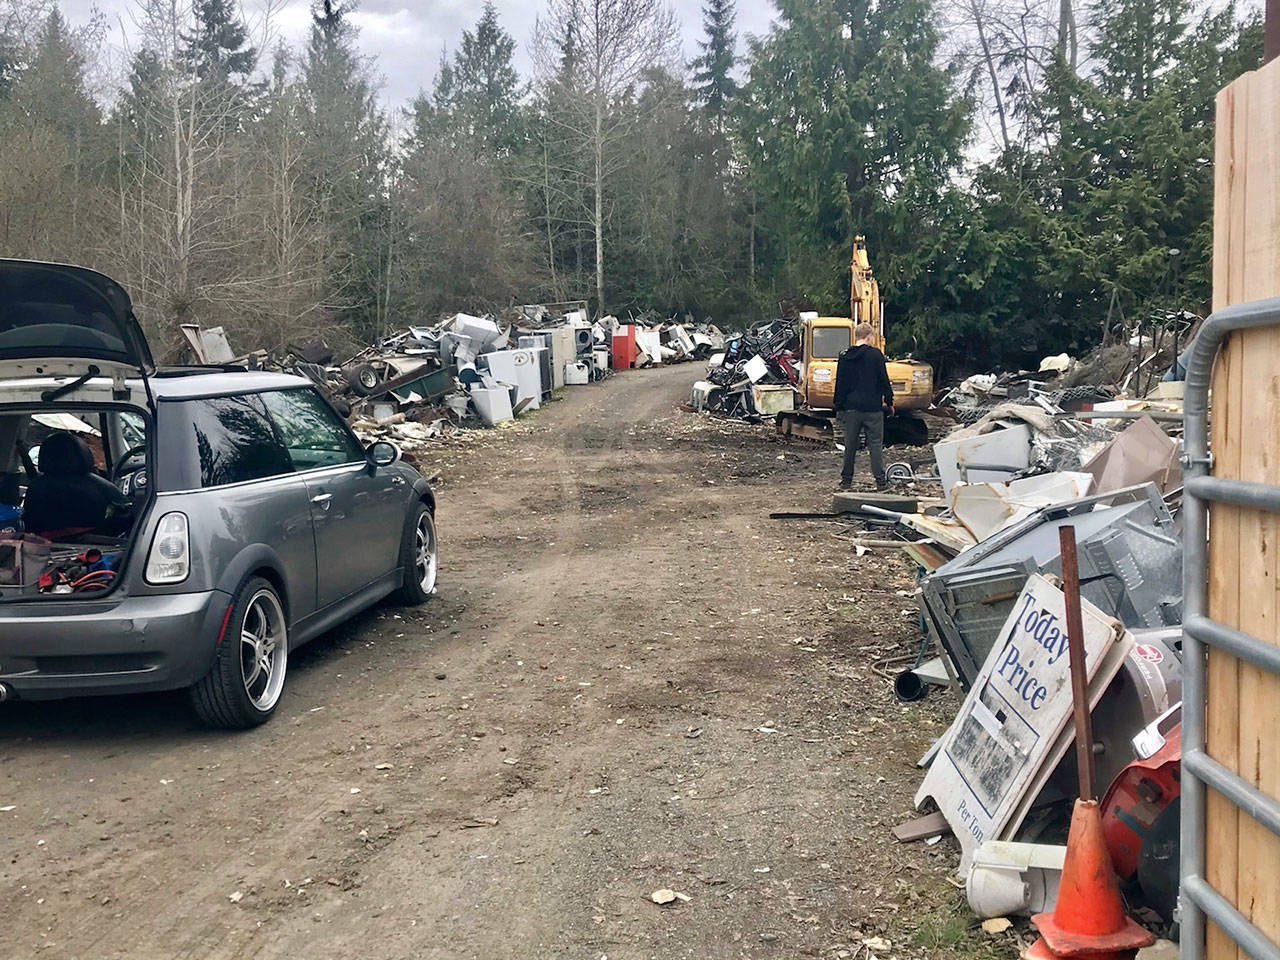 Tons of metal scrap are being hauled away from Midway Metals, avoiding enforcement action against its Port Orchard owner. (Paul Gottlieb/Peninsula Daily News)